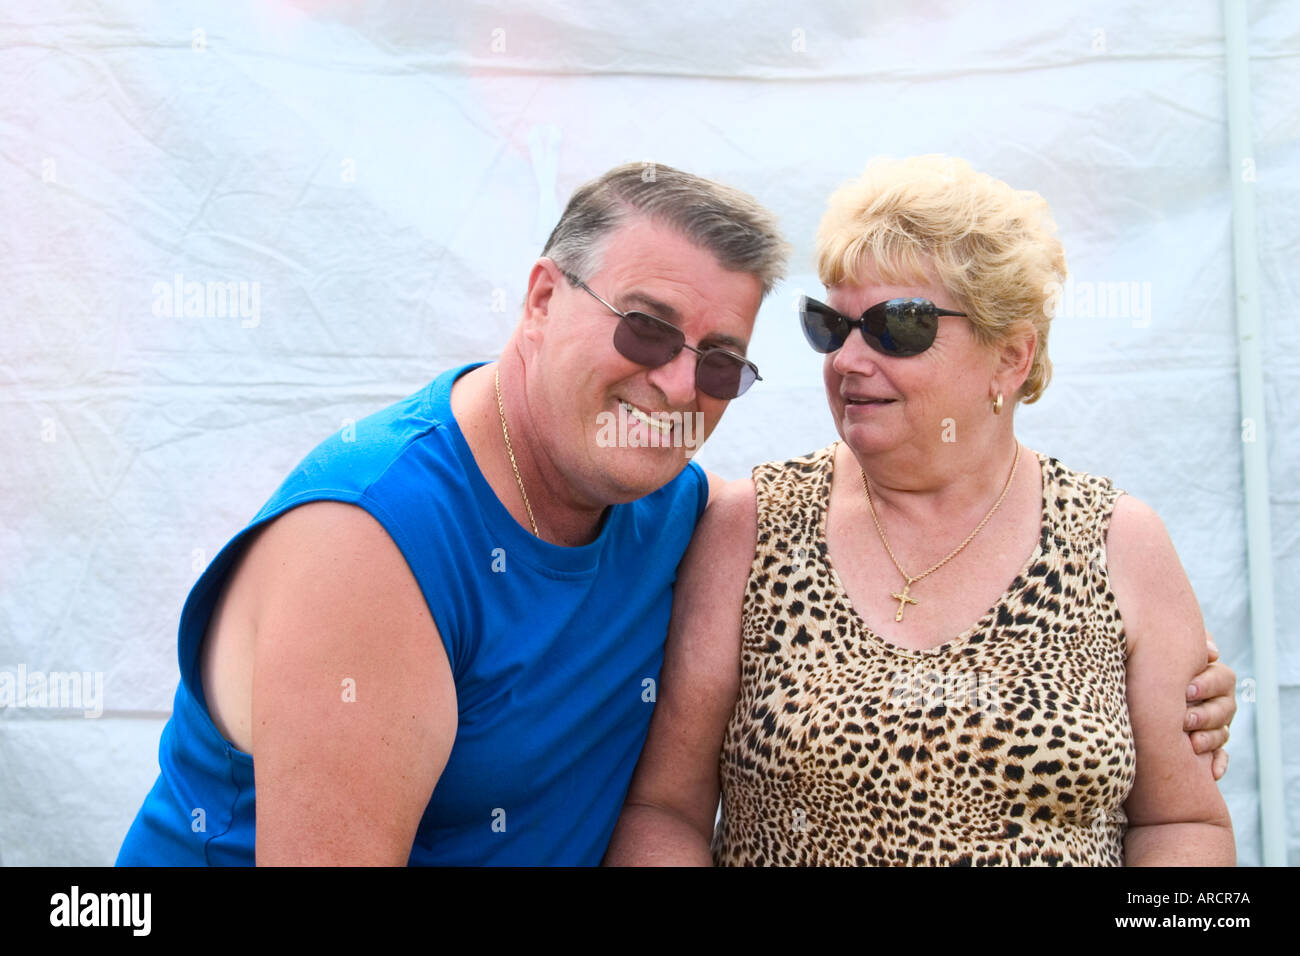 Middle-age couple posing. Stock Photo